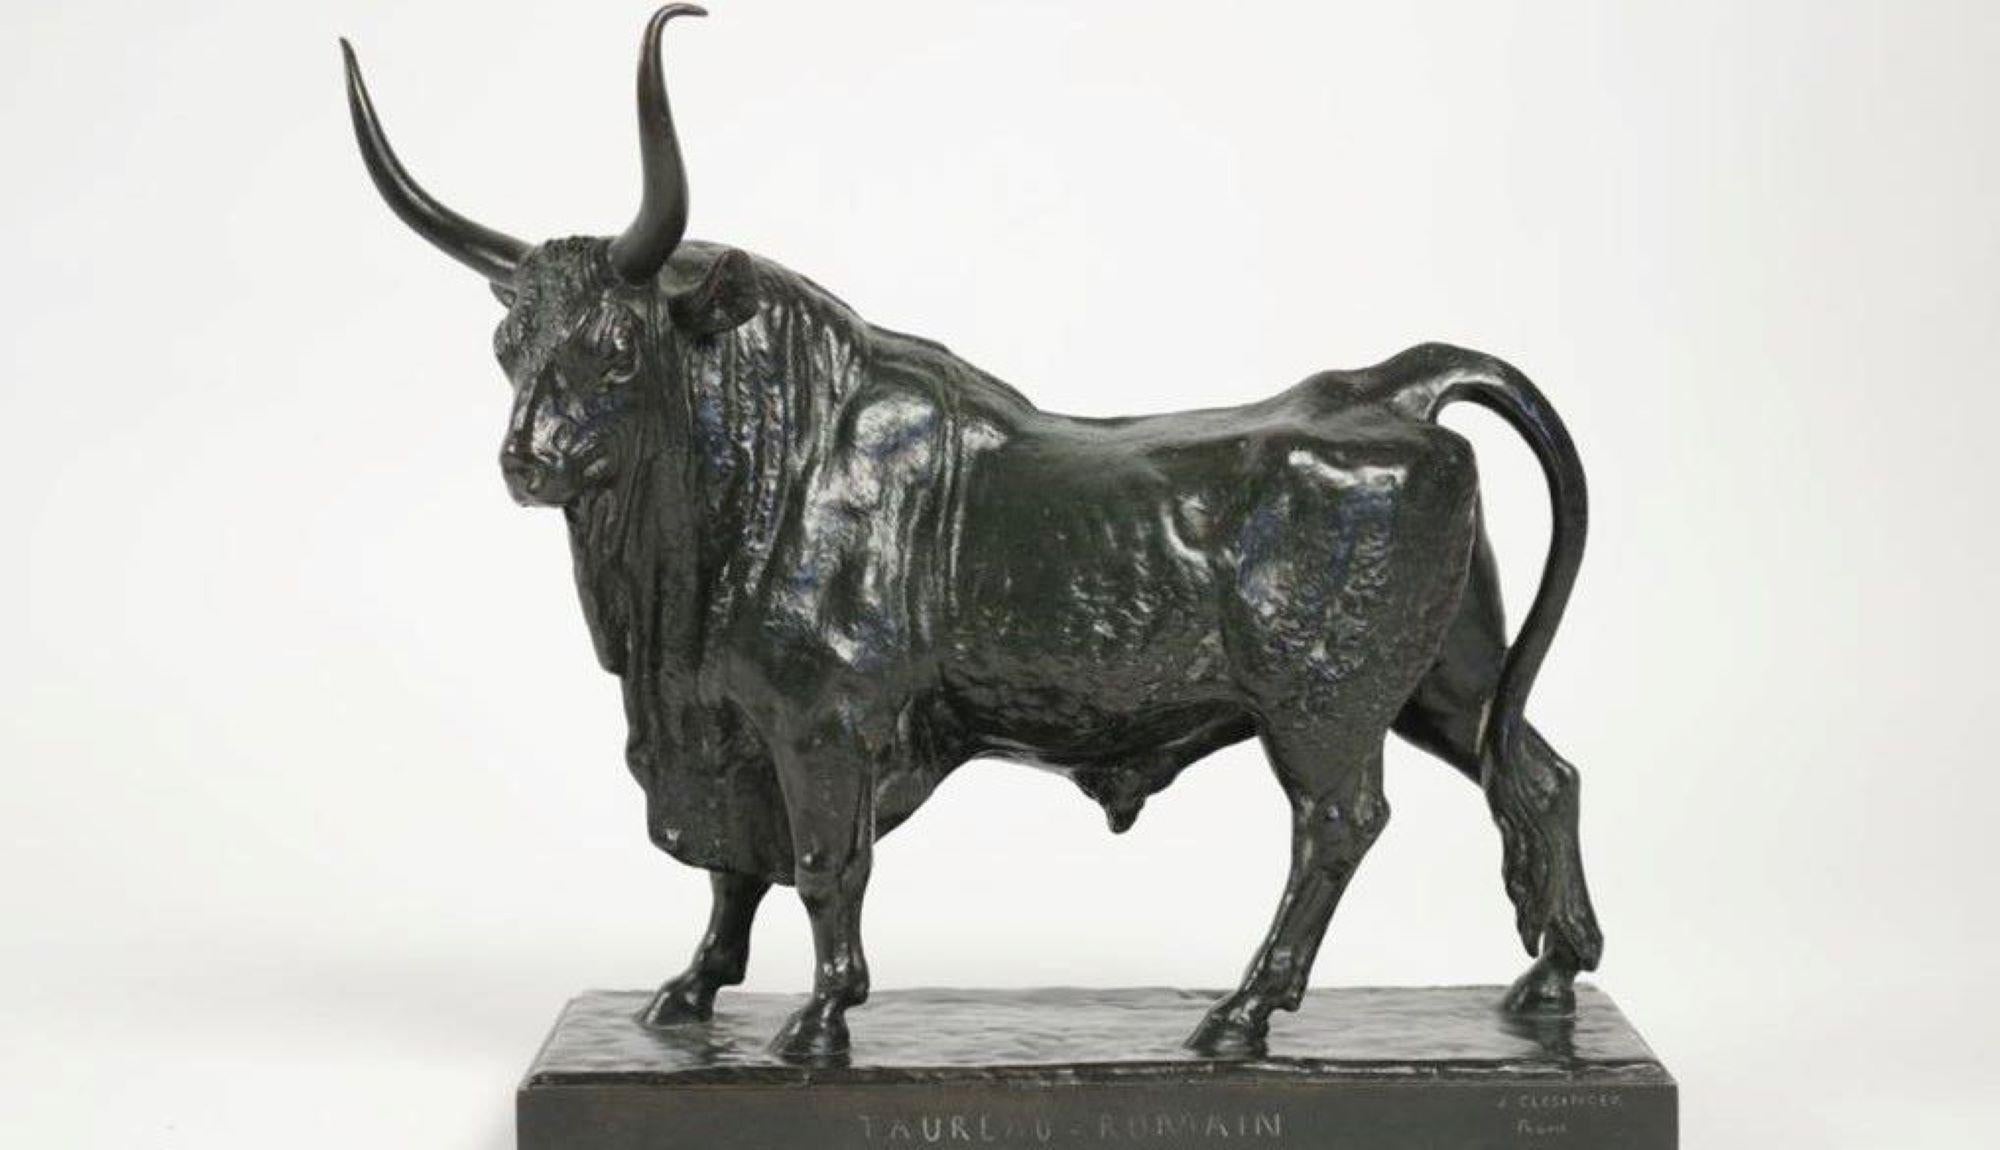 Bronze sculpture with green patina, Le Taureau Romain (The roman Bull), by Jean-Baptiste Clesinger, (1814-1883)
Rectangular terrace
Titled: Taureau - Romain
Signed J. Clesinger Located in Rome on the front of the terrace Founder's mark: F.